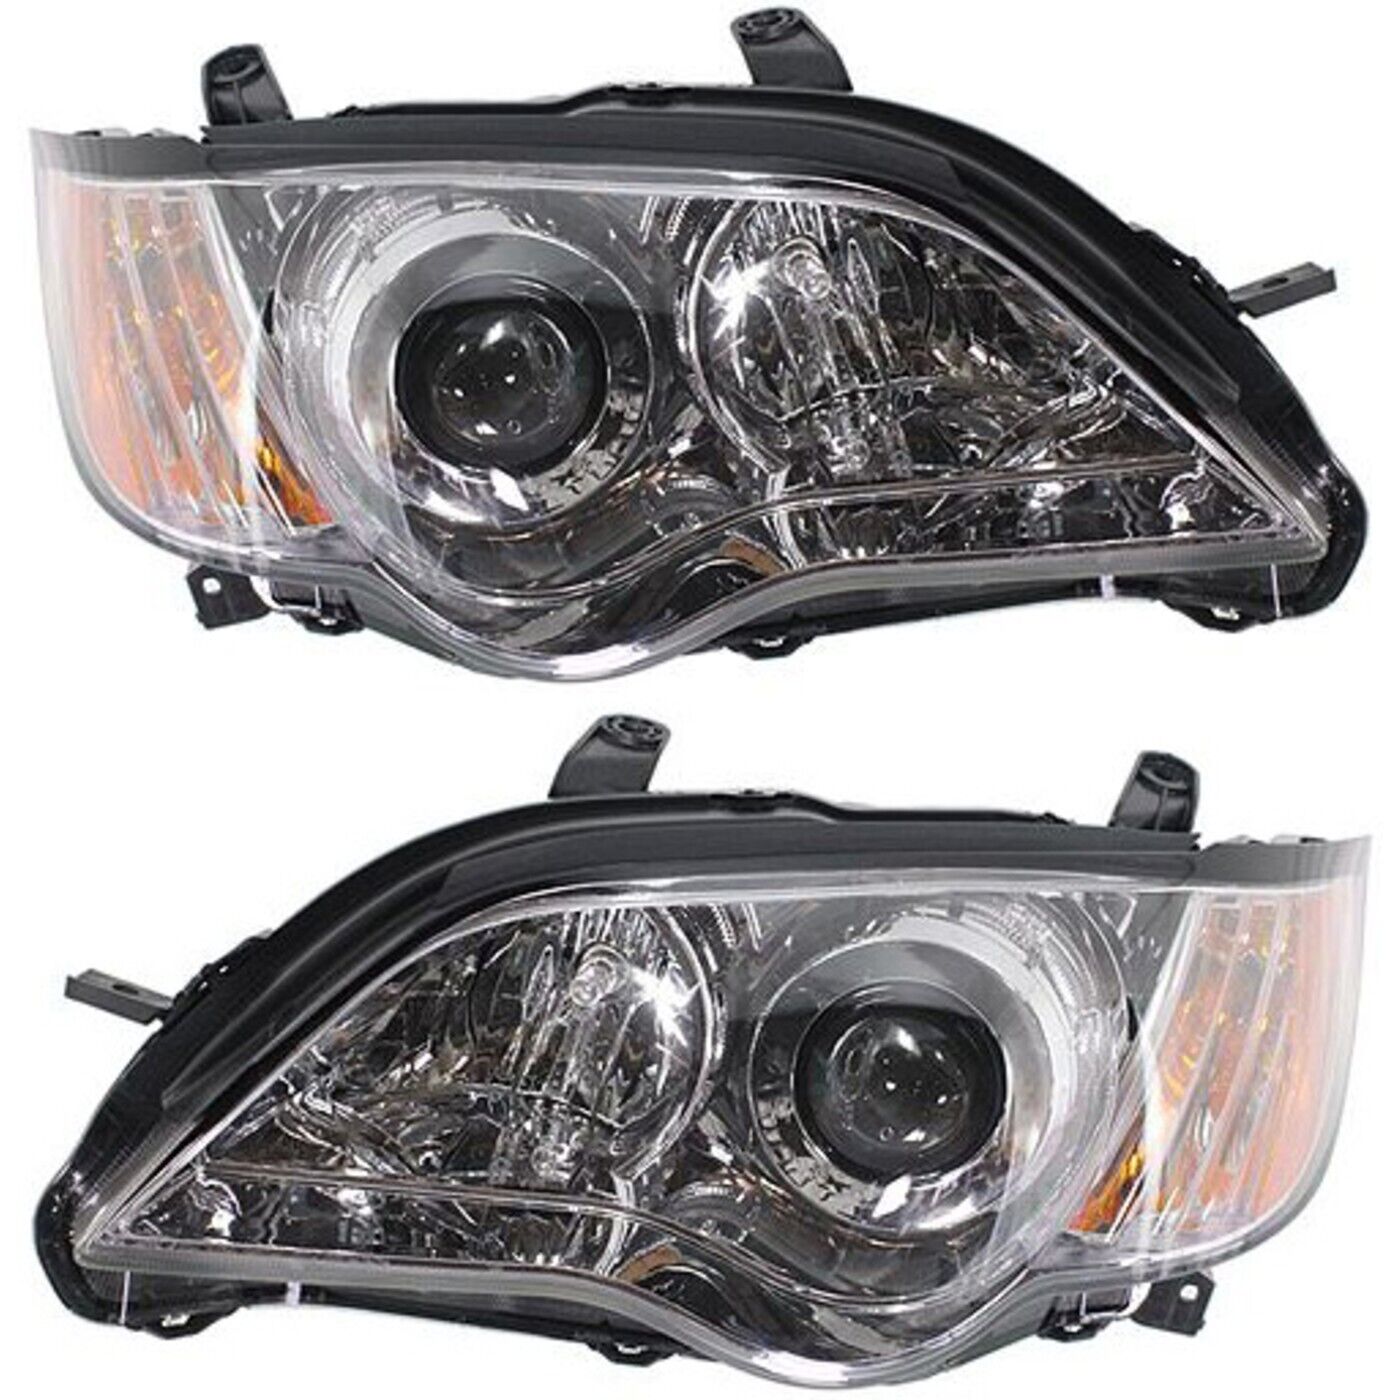 Headlight Assembly Set For 2008-2009 Subaru Outback Left Right Halogen With Bulb